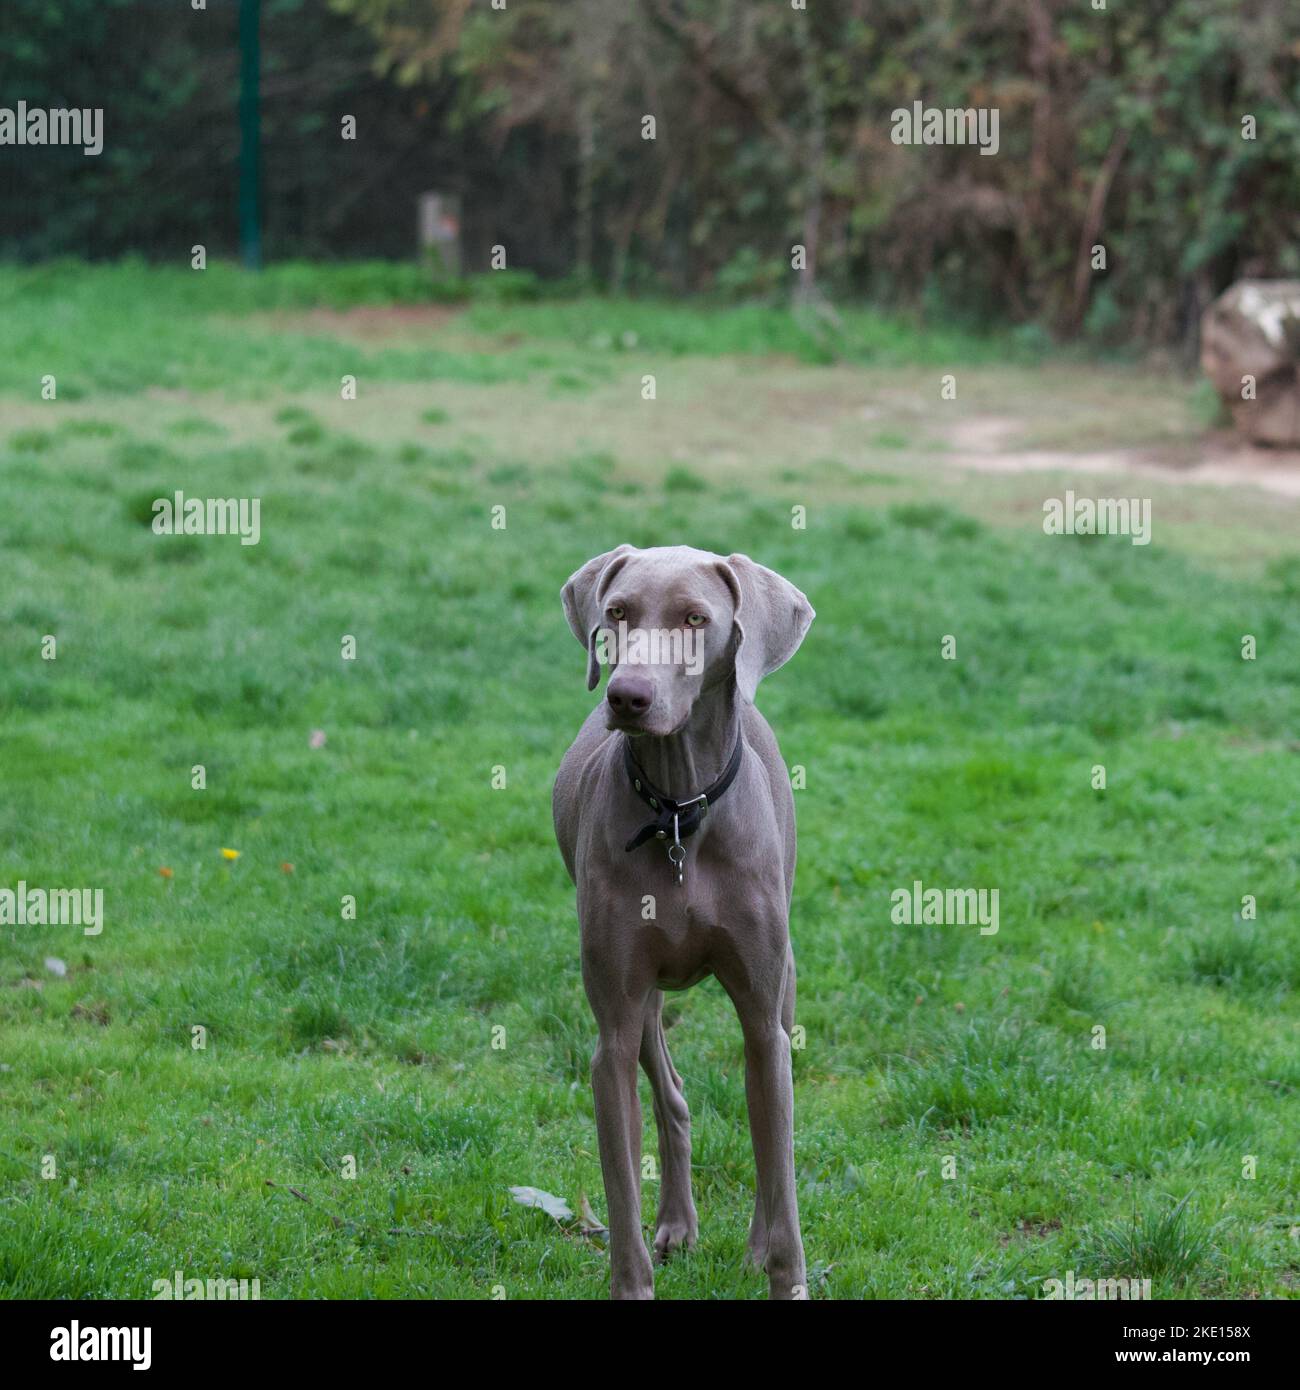 One beautiful Weimaraner dog in a dog park looking away with a serious attitude. Stock Photo